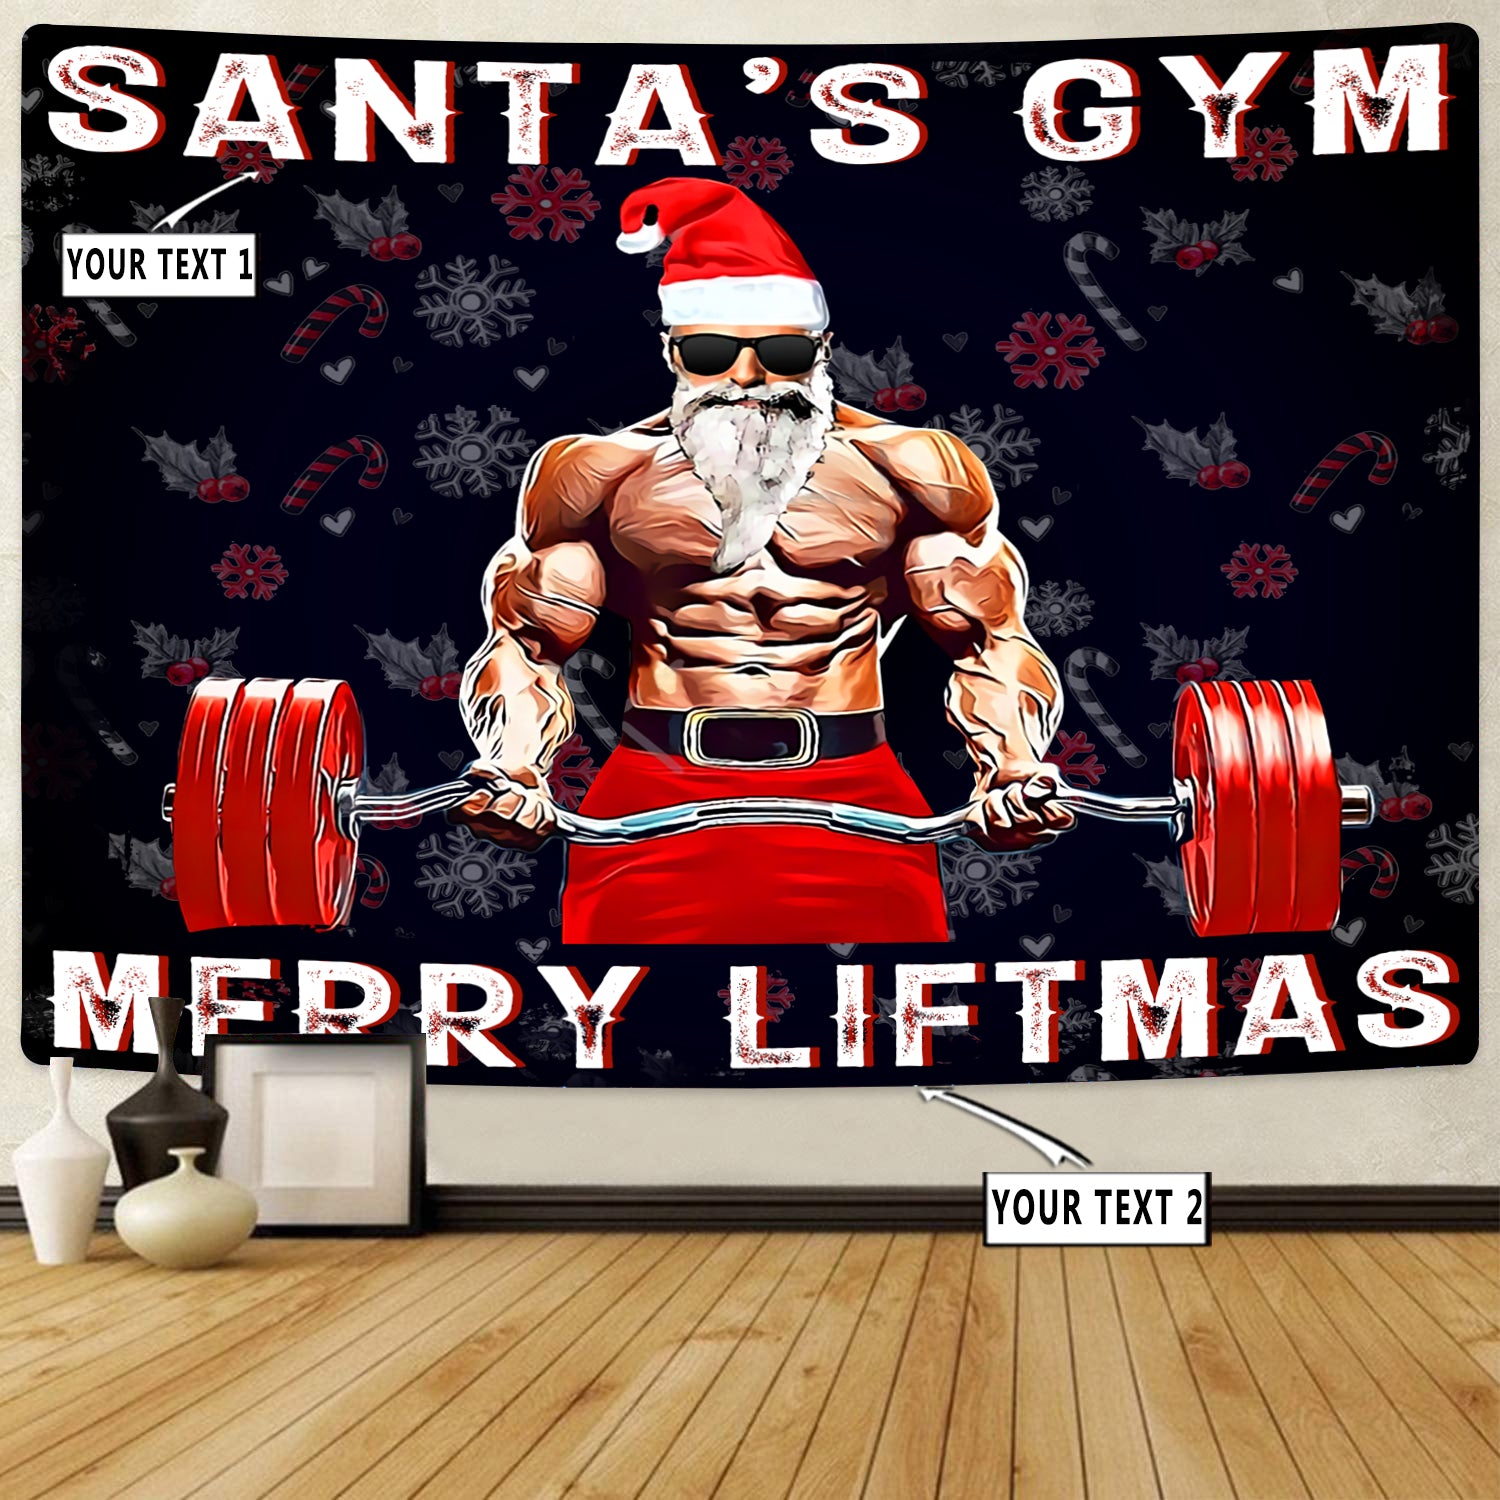 Personalized Fitness Home Gym Decor Liftmas Banner Flag Tapestry